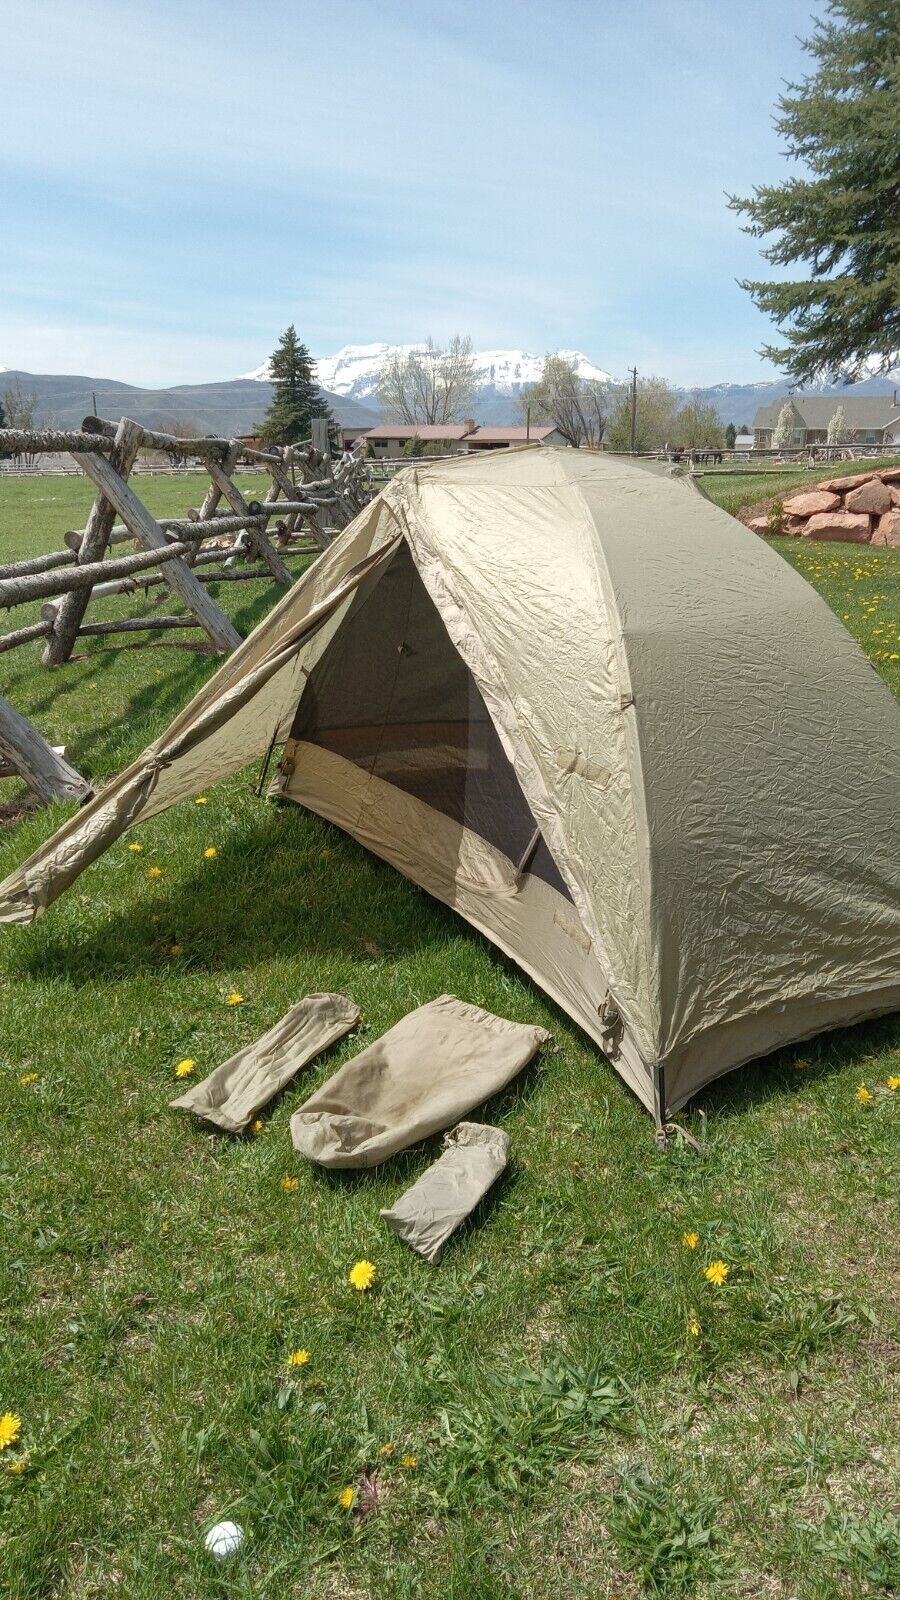 Litefighter 1 Tan Coyote Combat Shelter System One-Person Tent Grade 2 Good Used